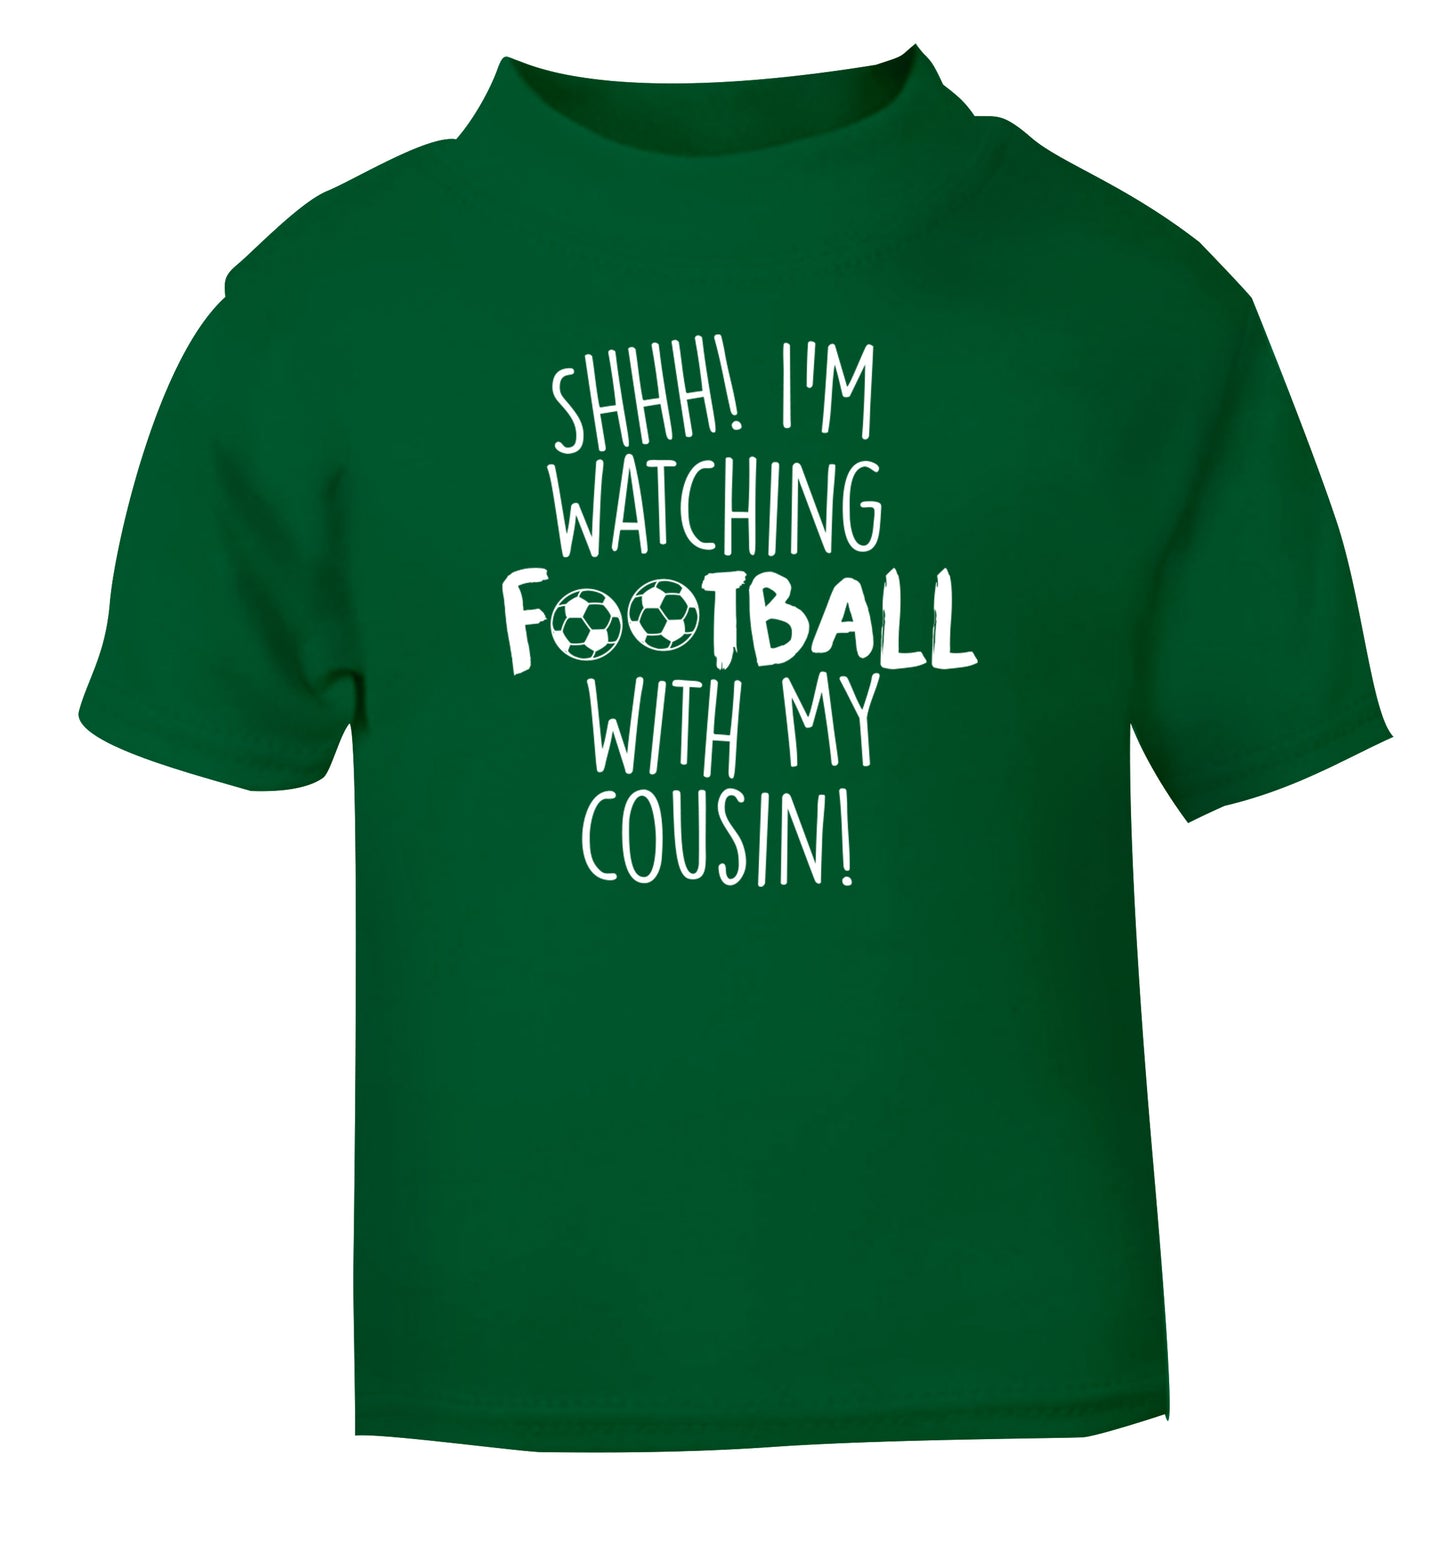 Shhh I'm watching football with my cousin green Baby Toddler Tshirt 2 Years